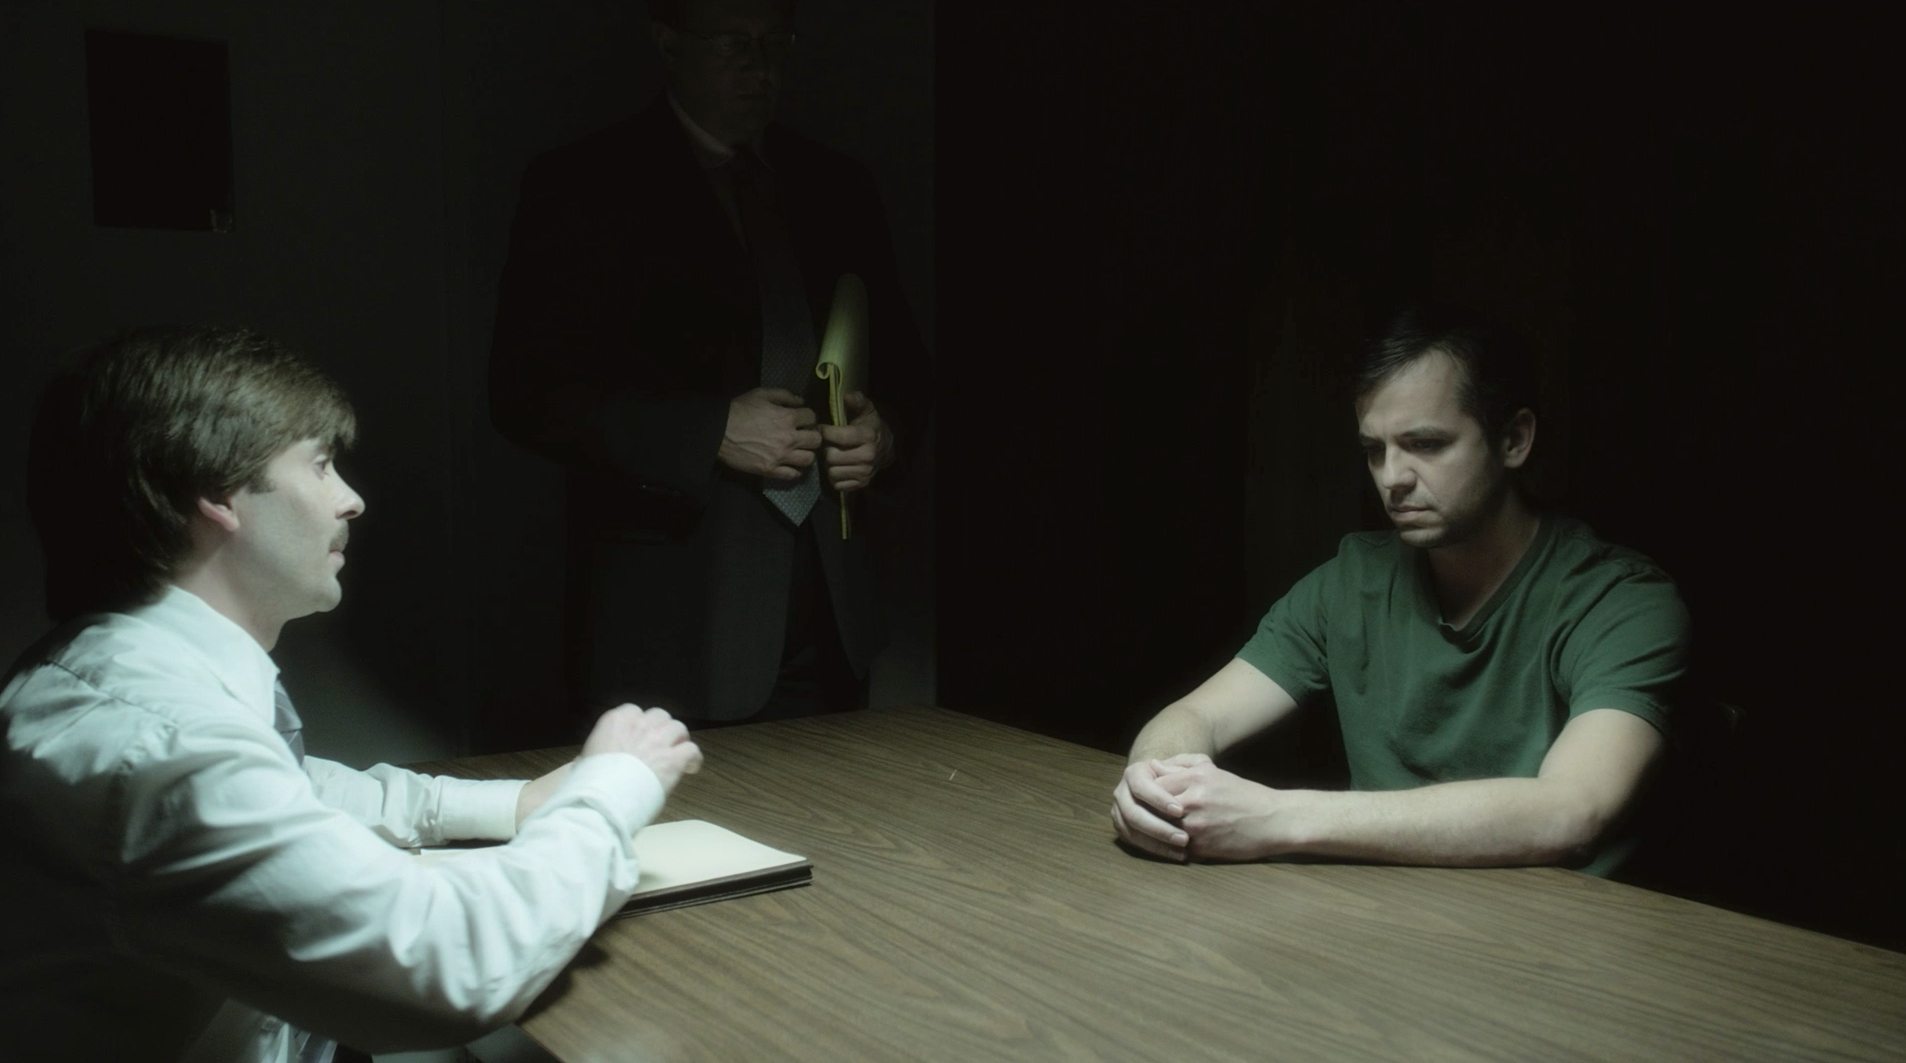 Todd Jenkins as Bruce Chesser getting interrogated.